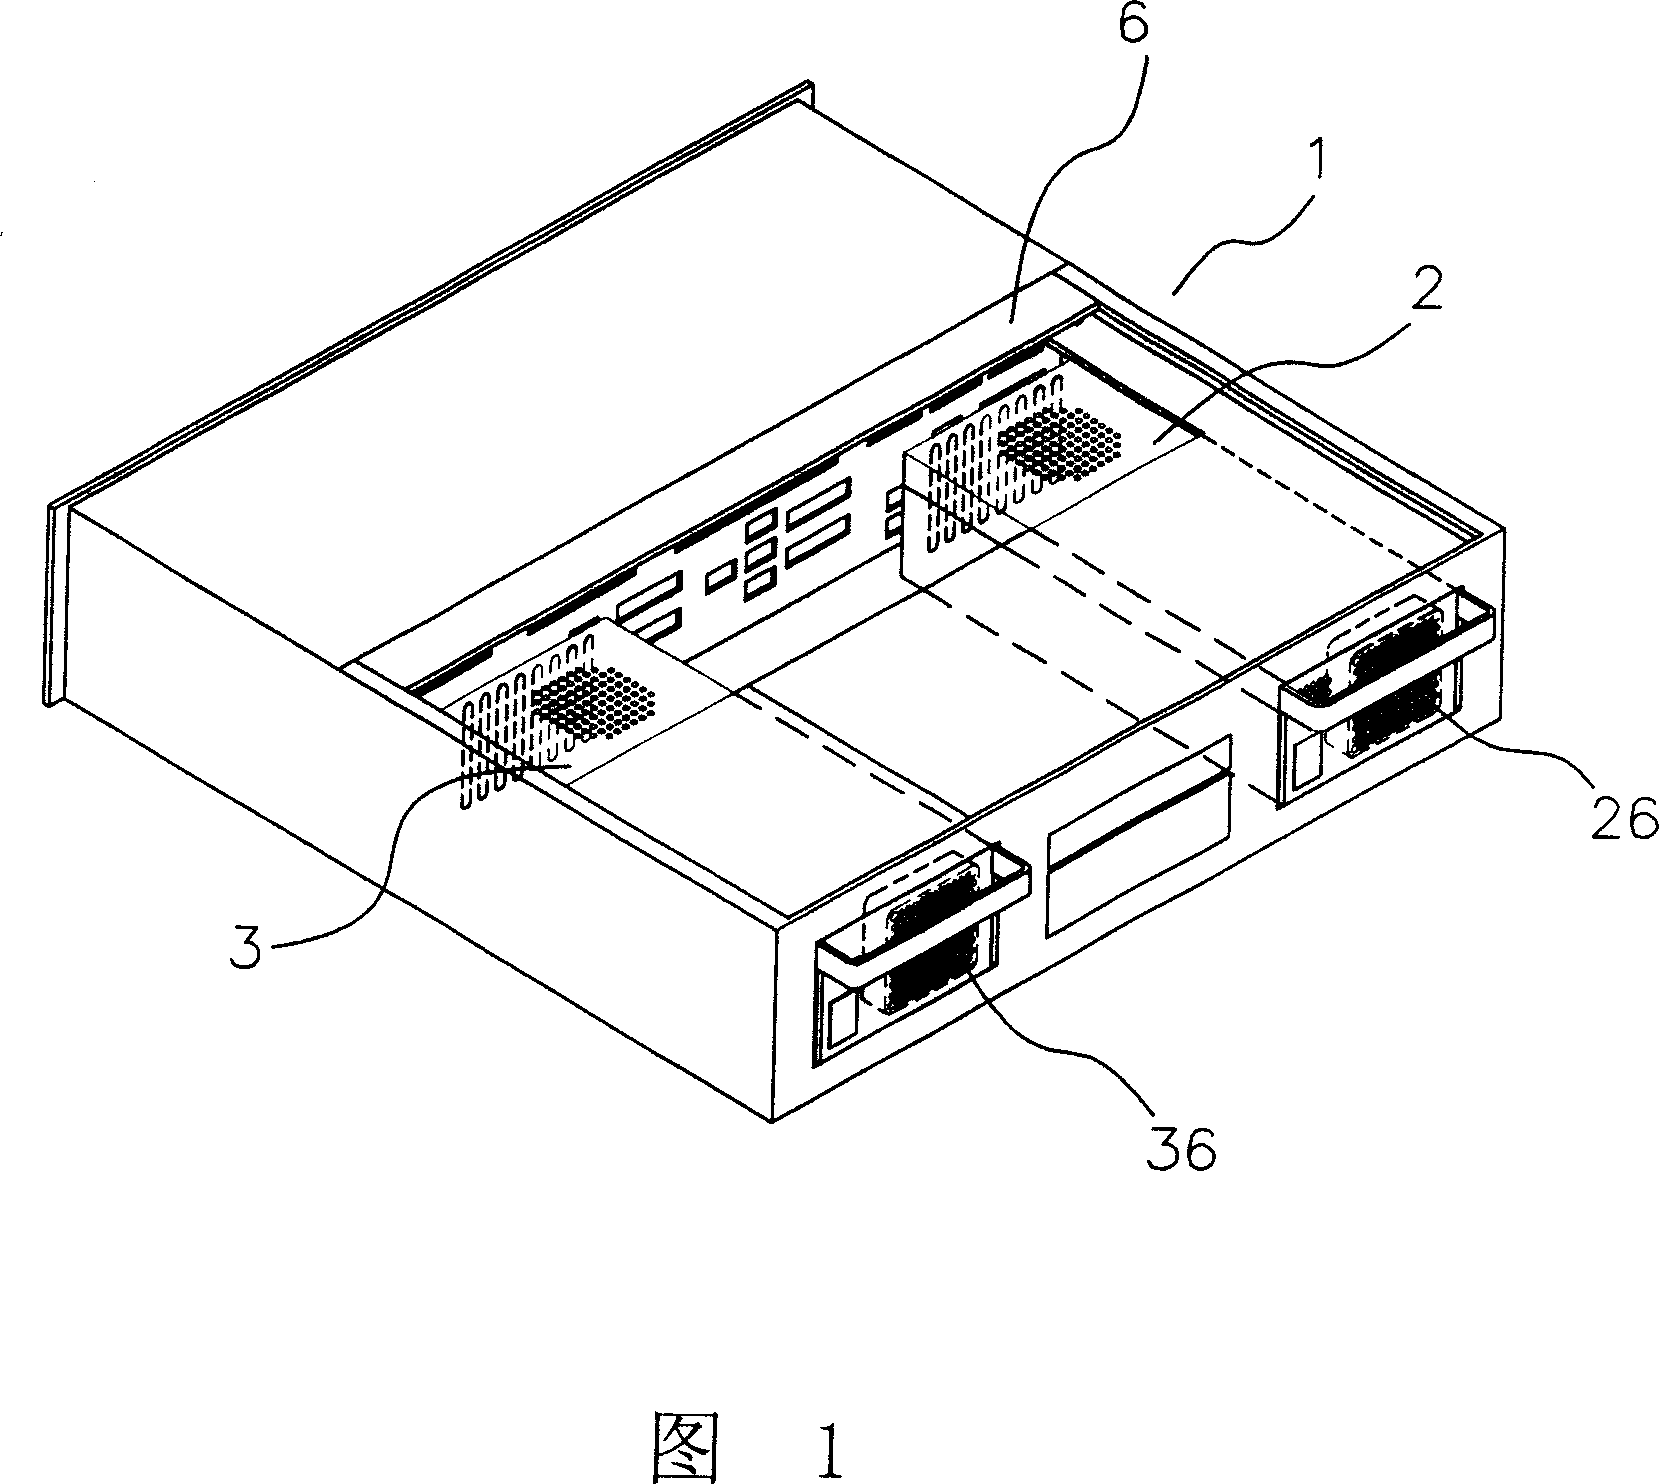 Structure of heat elimination module of computer, and optimized regulate and control method for air quantity and noise value